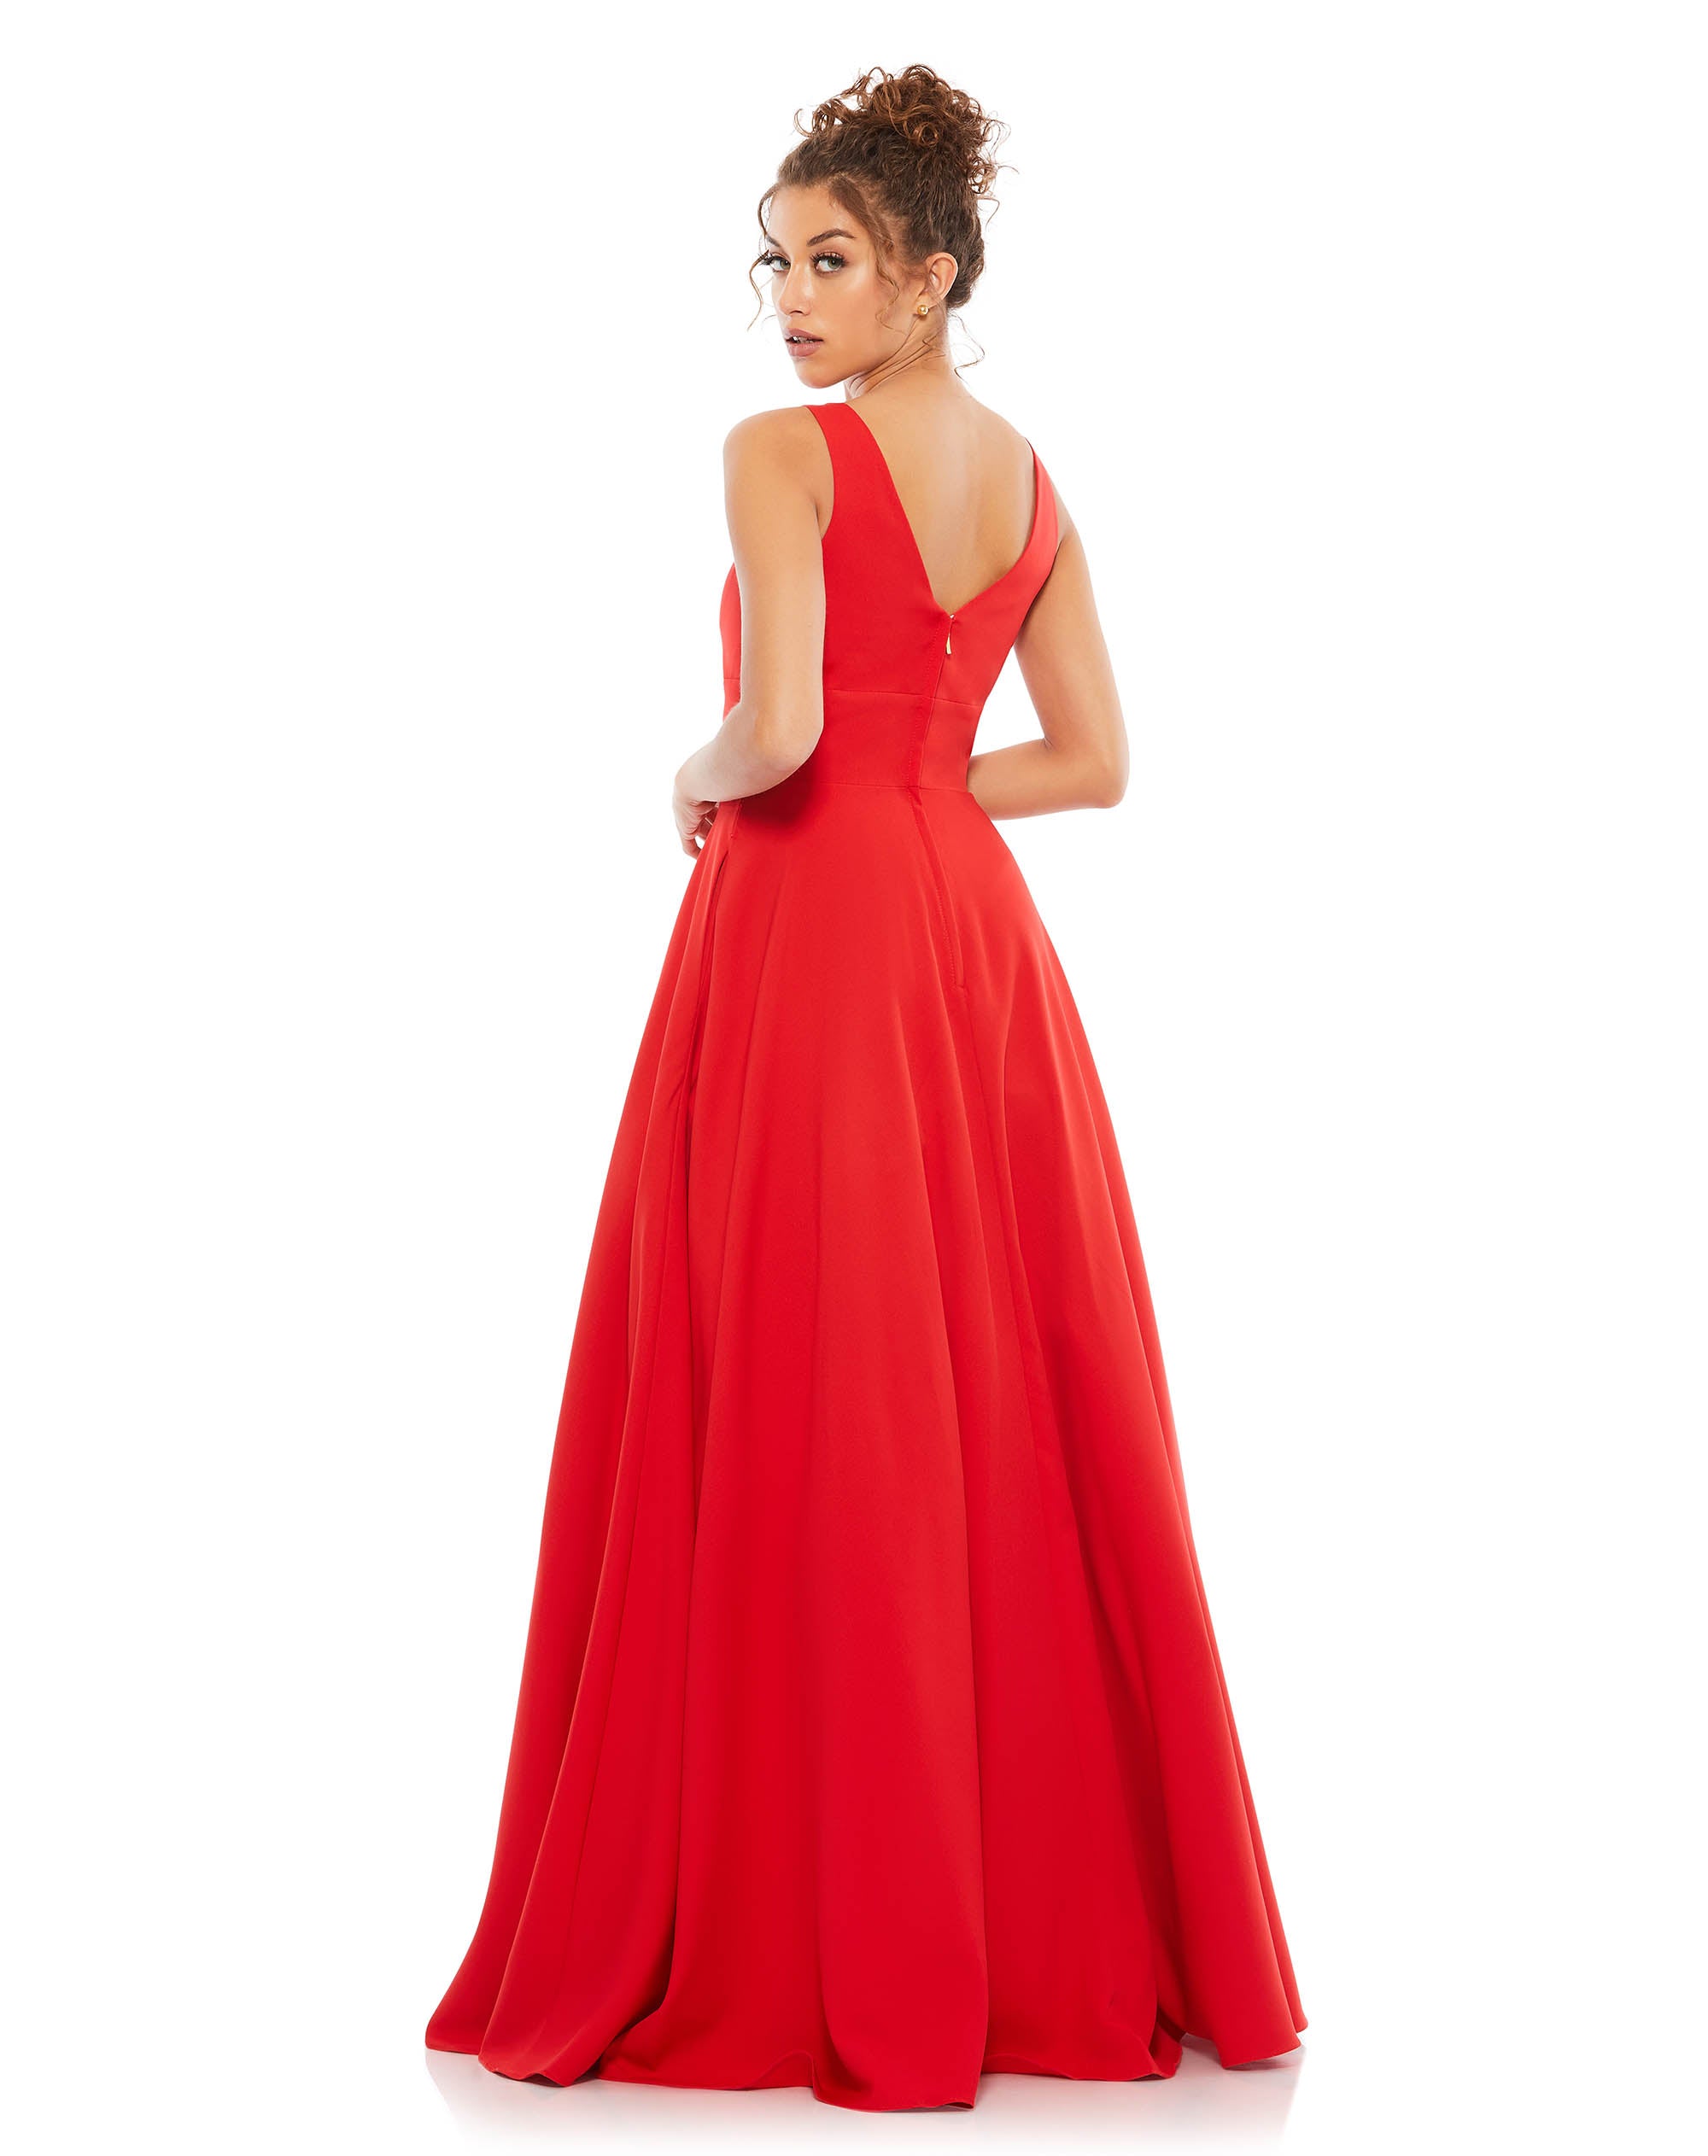 Classic Sleeveless A-Line Ball Gown